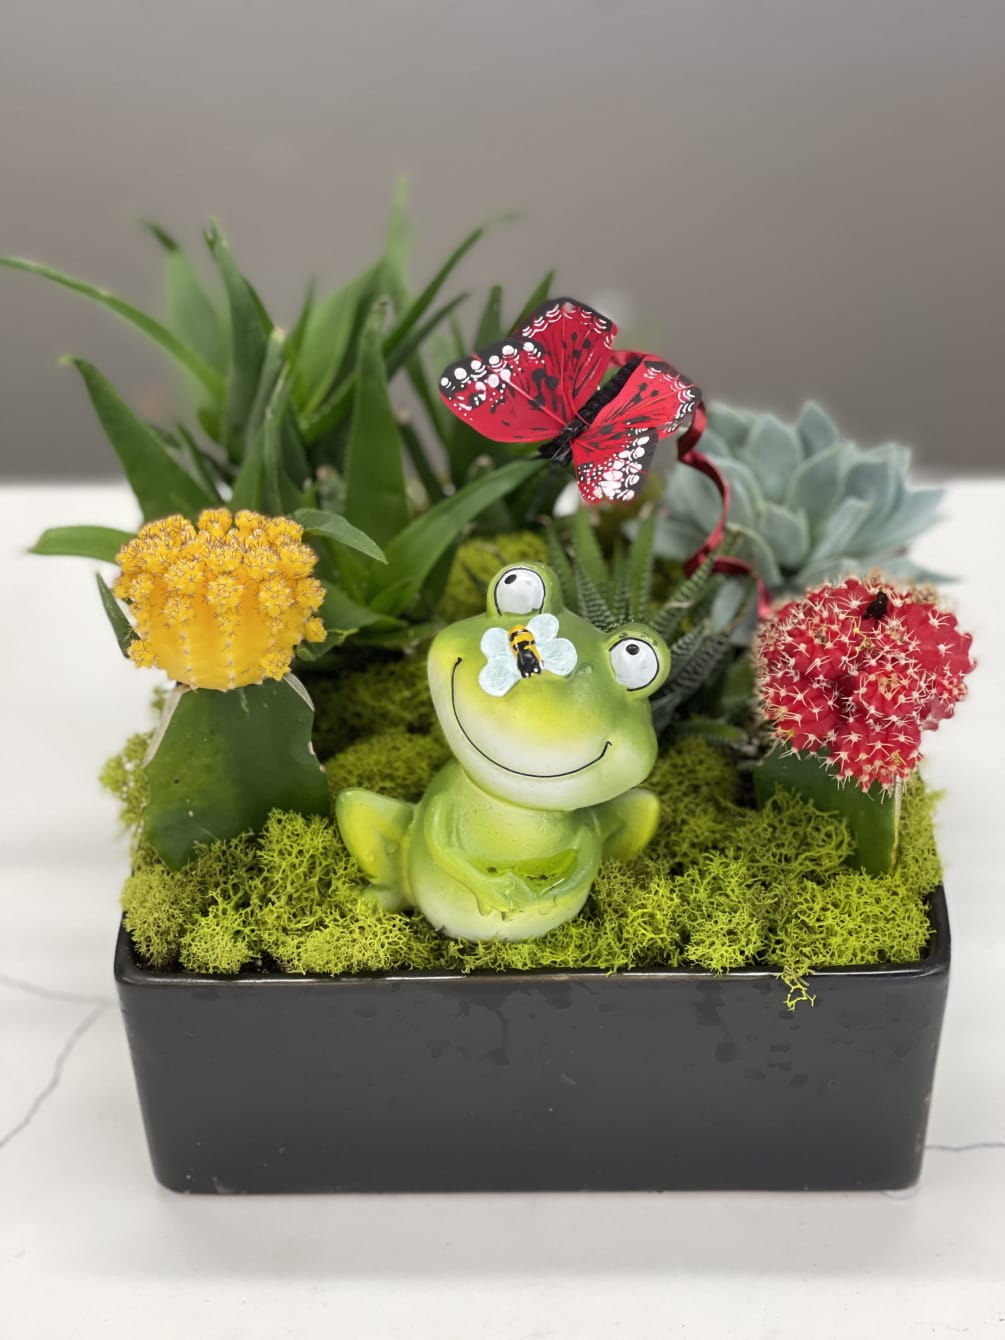 This cute little froggy is happy happy happy in his little succulent